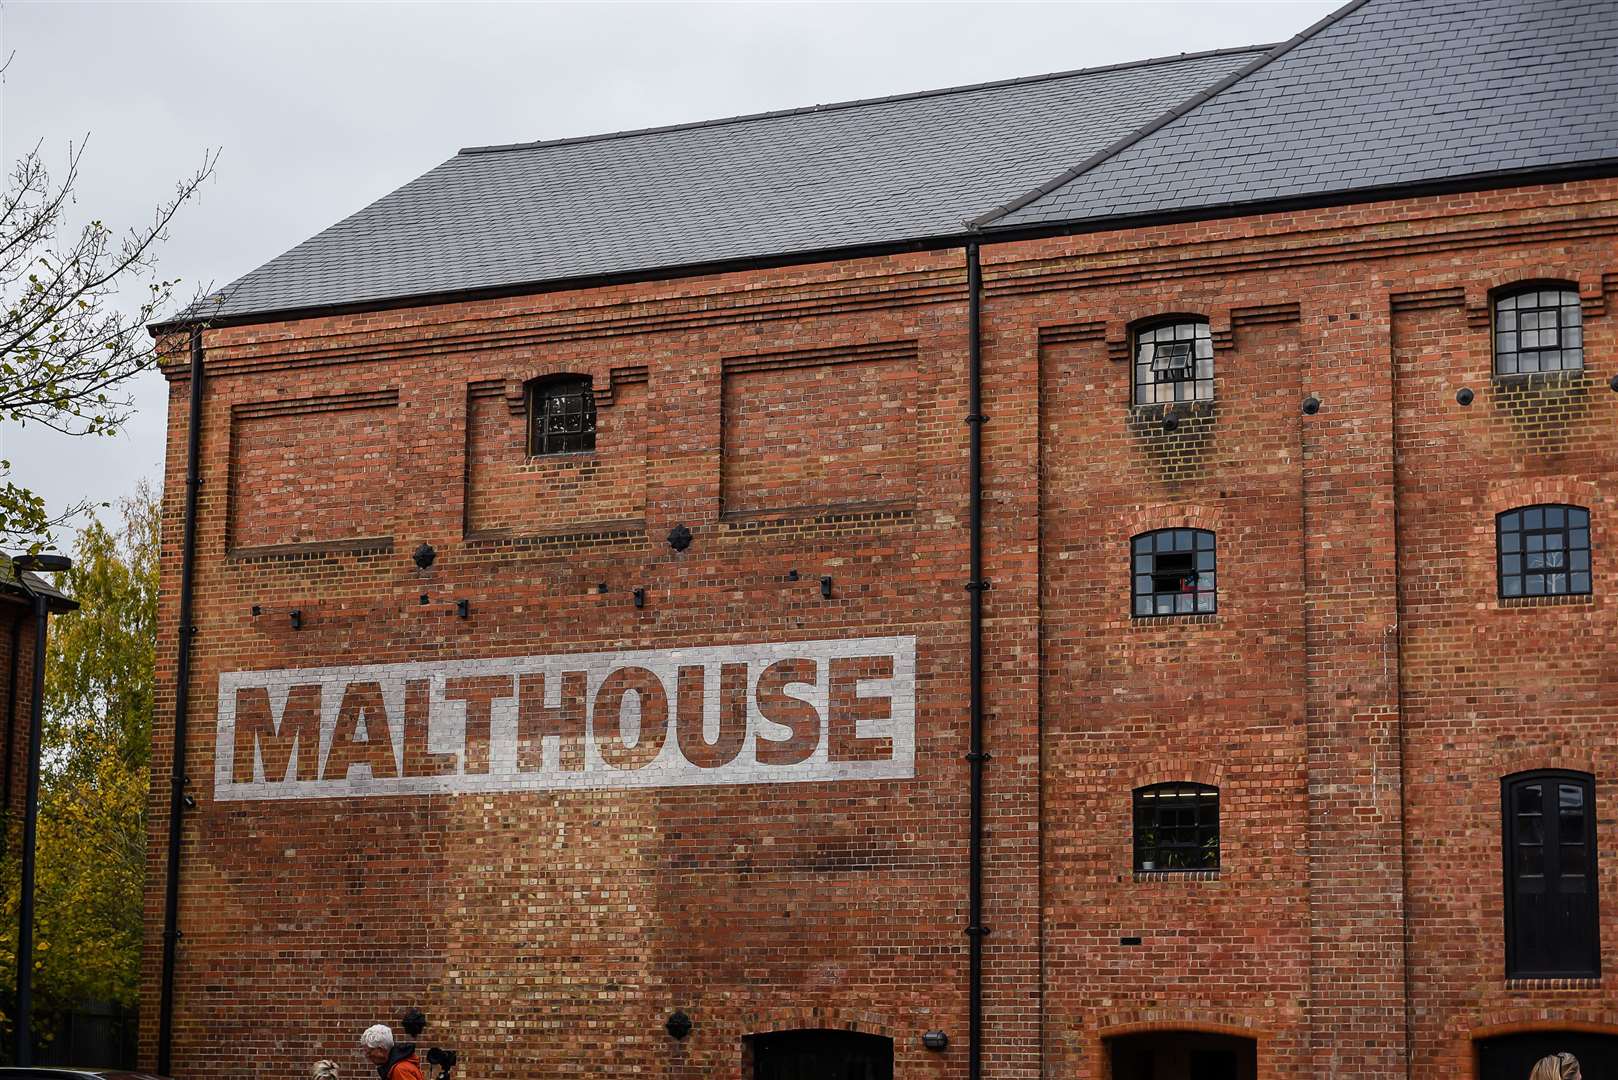 The Malthouse Theatre will be hosting a panto this Christmas. Picture: Alan Langley